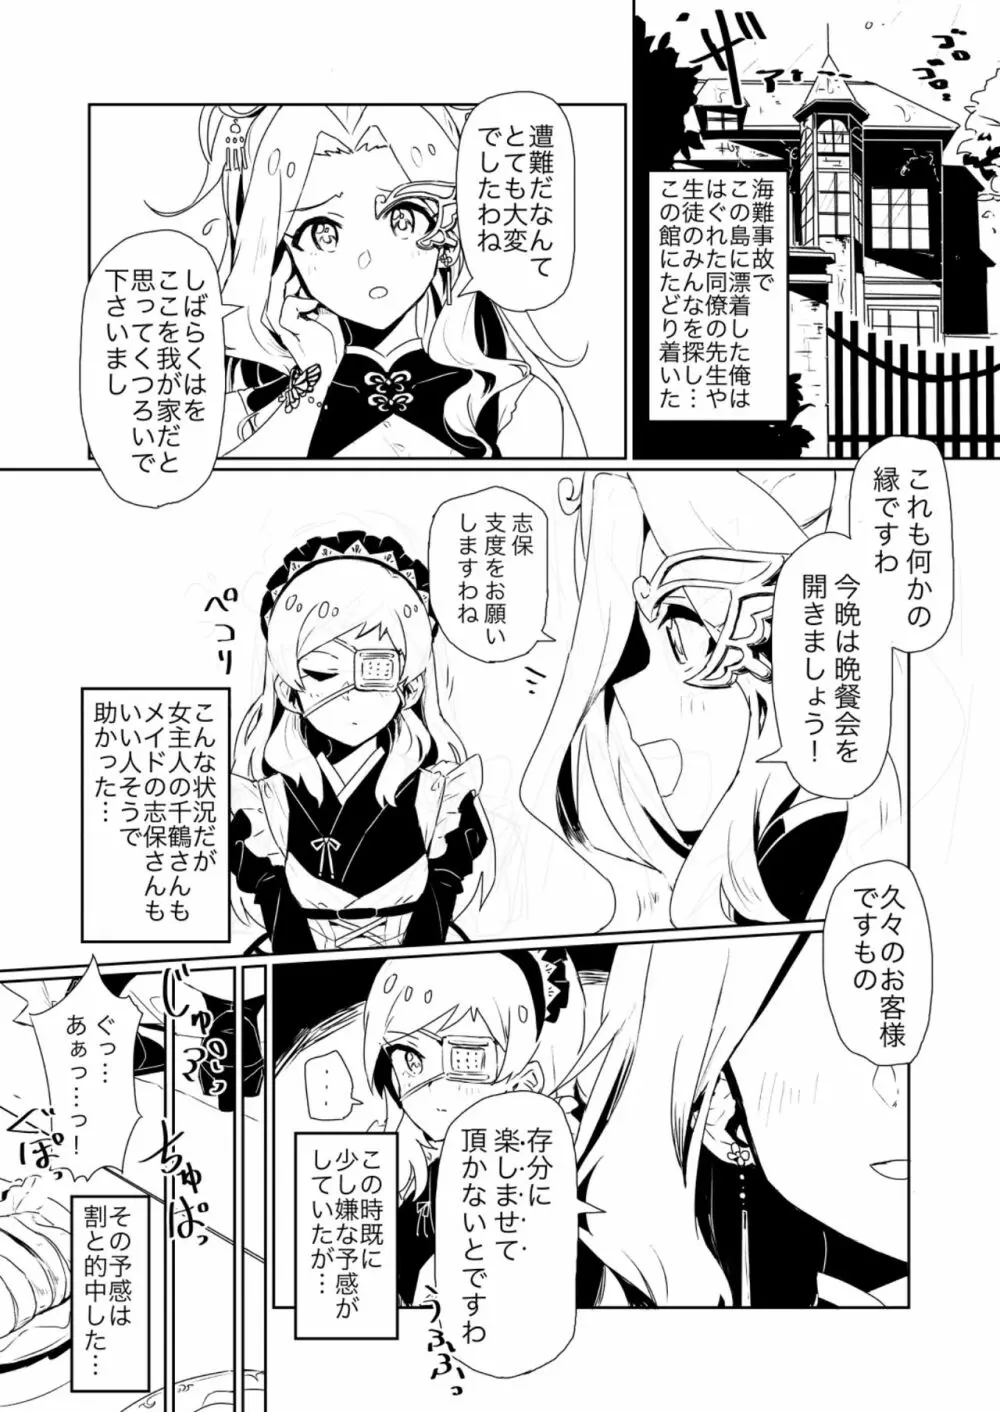 Fabrication&Delusion 誰ソ彼ノ淵編 Page.2